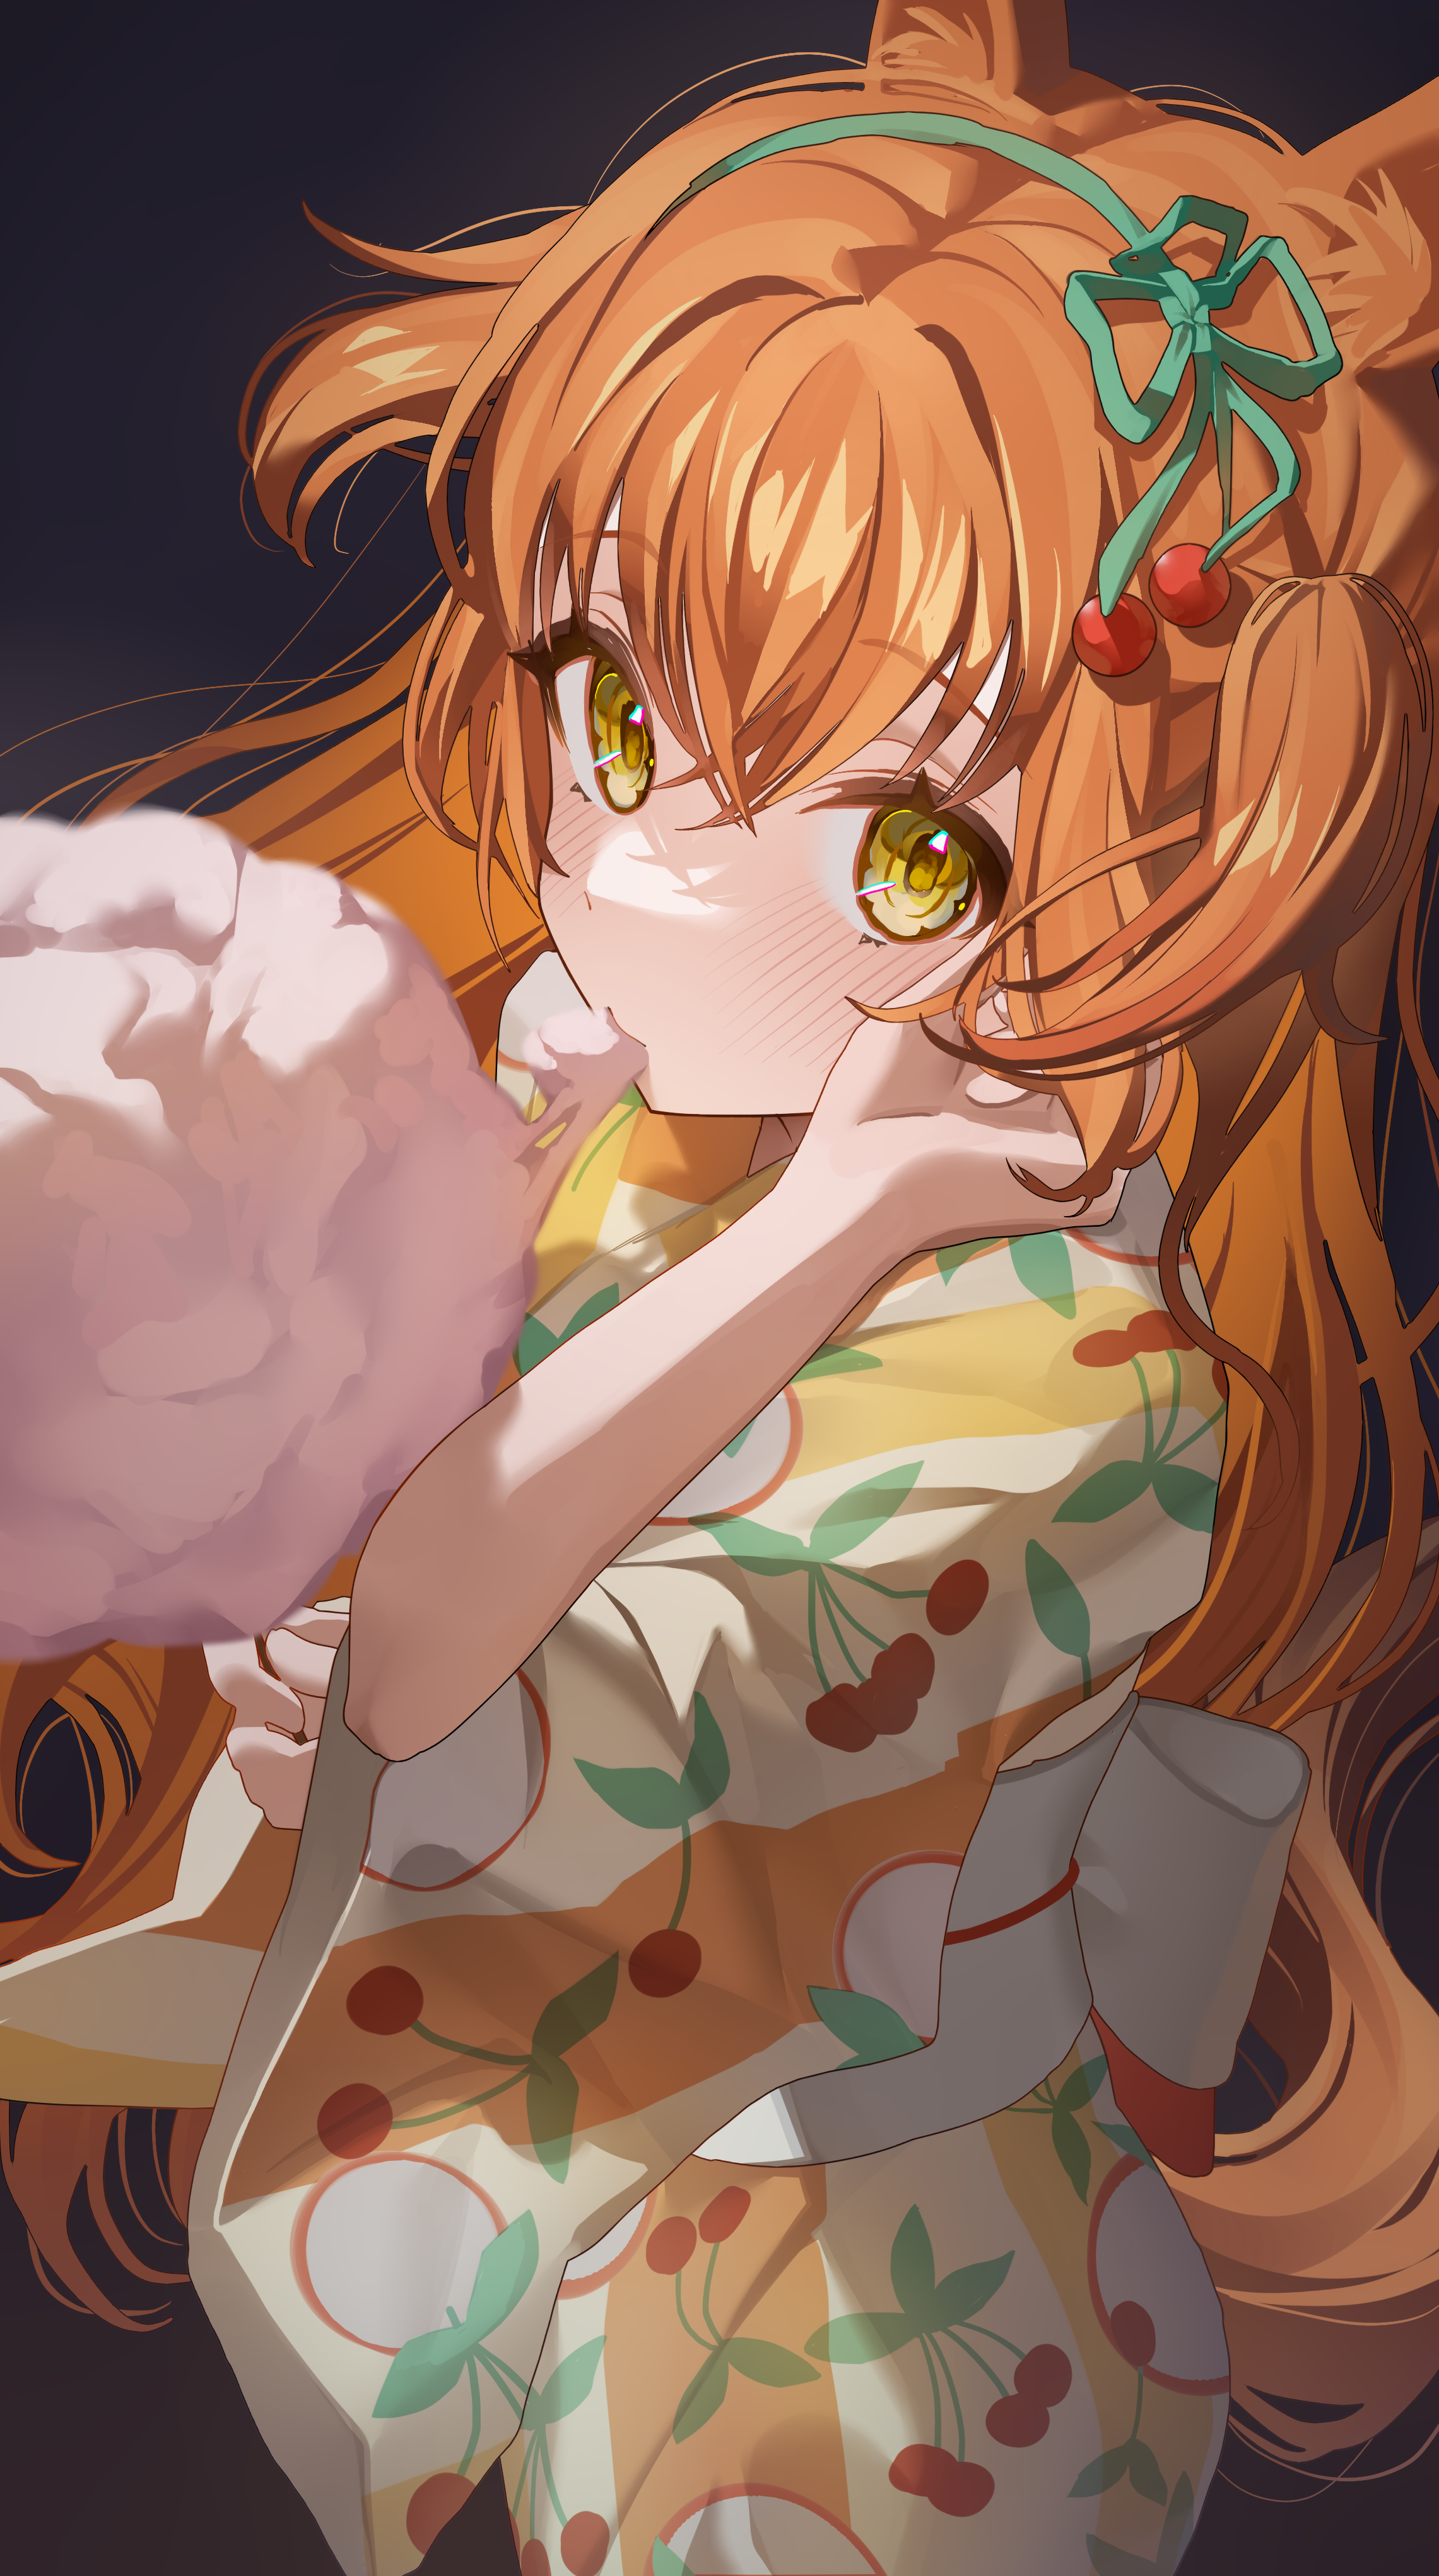 Anime 2281x4084 anime anime girls redhead yellow eyes cotton candy eating sweets animal ears tail